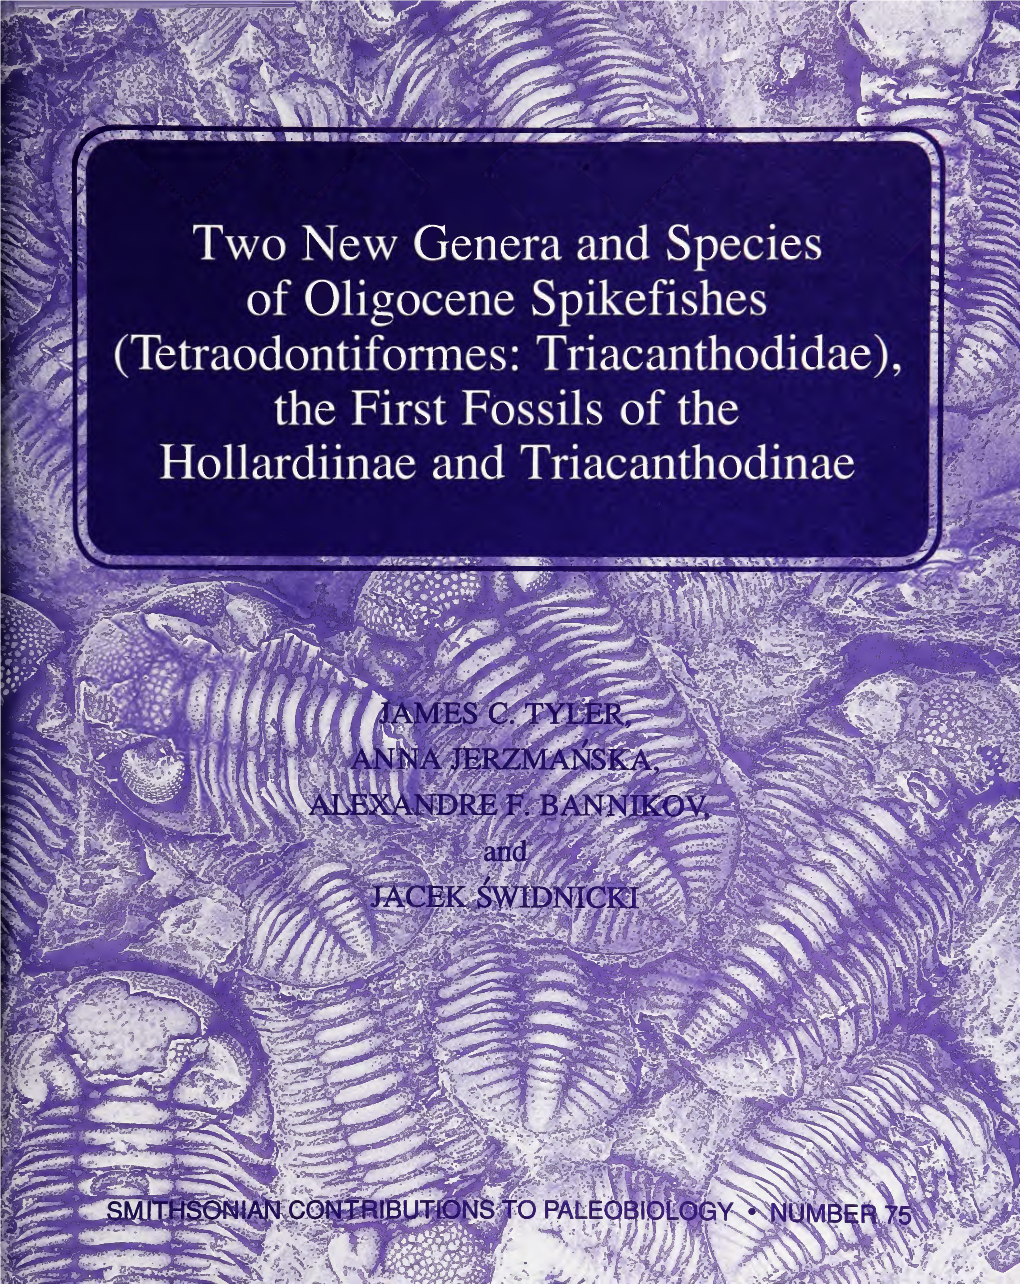 Two New Genera and Species of Oligocene Spikefishes (Tetraodontiformes: Triacanthodidae), the First Fossils of the Hollardiinae and Triacanthodinae